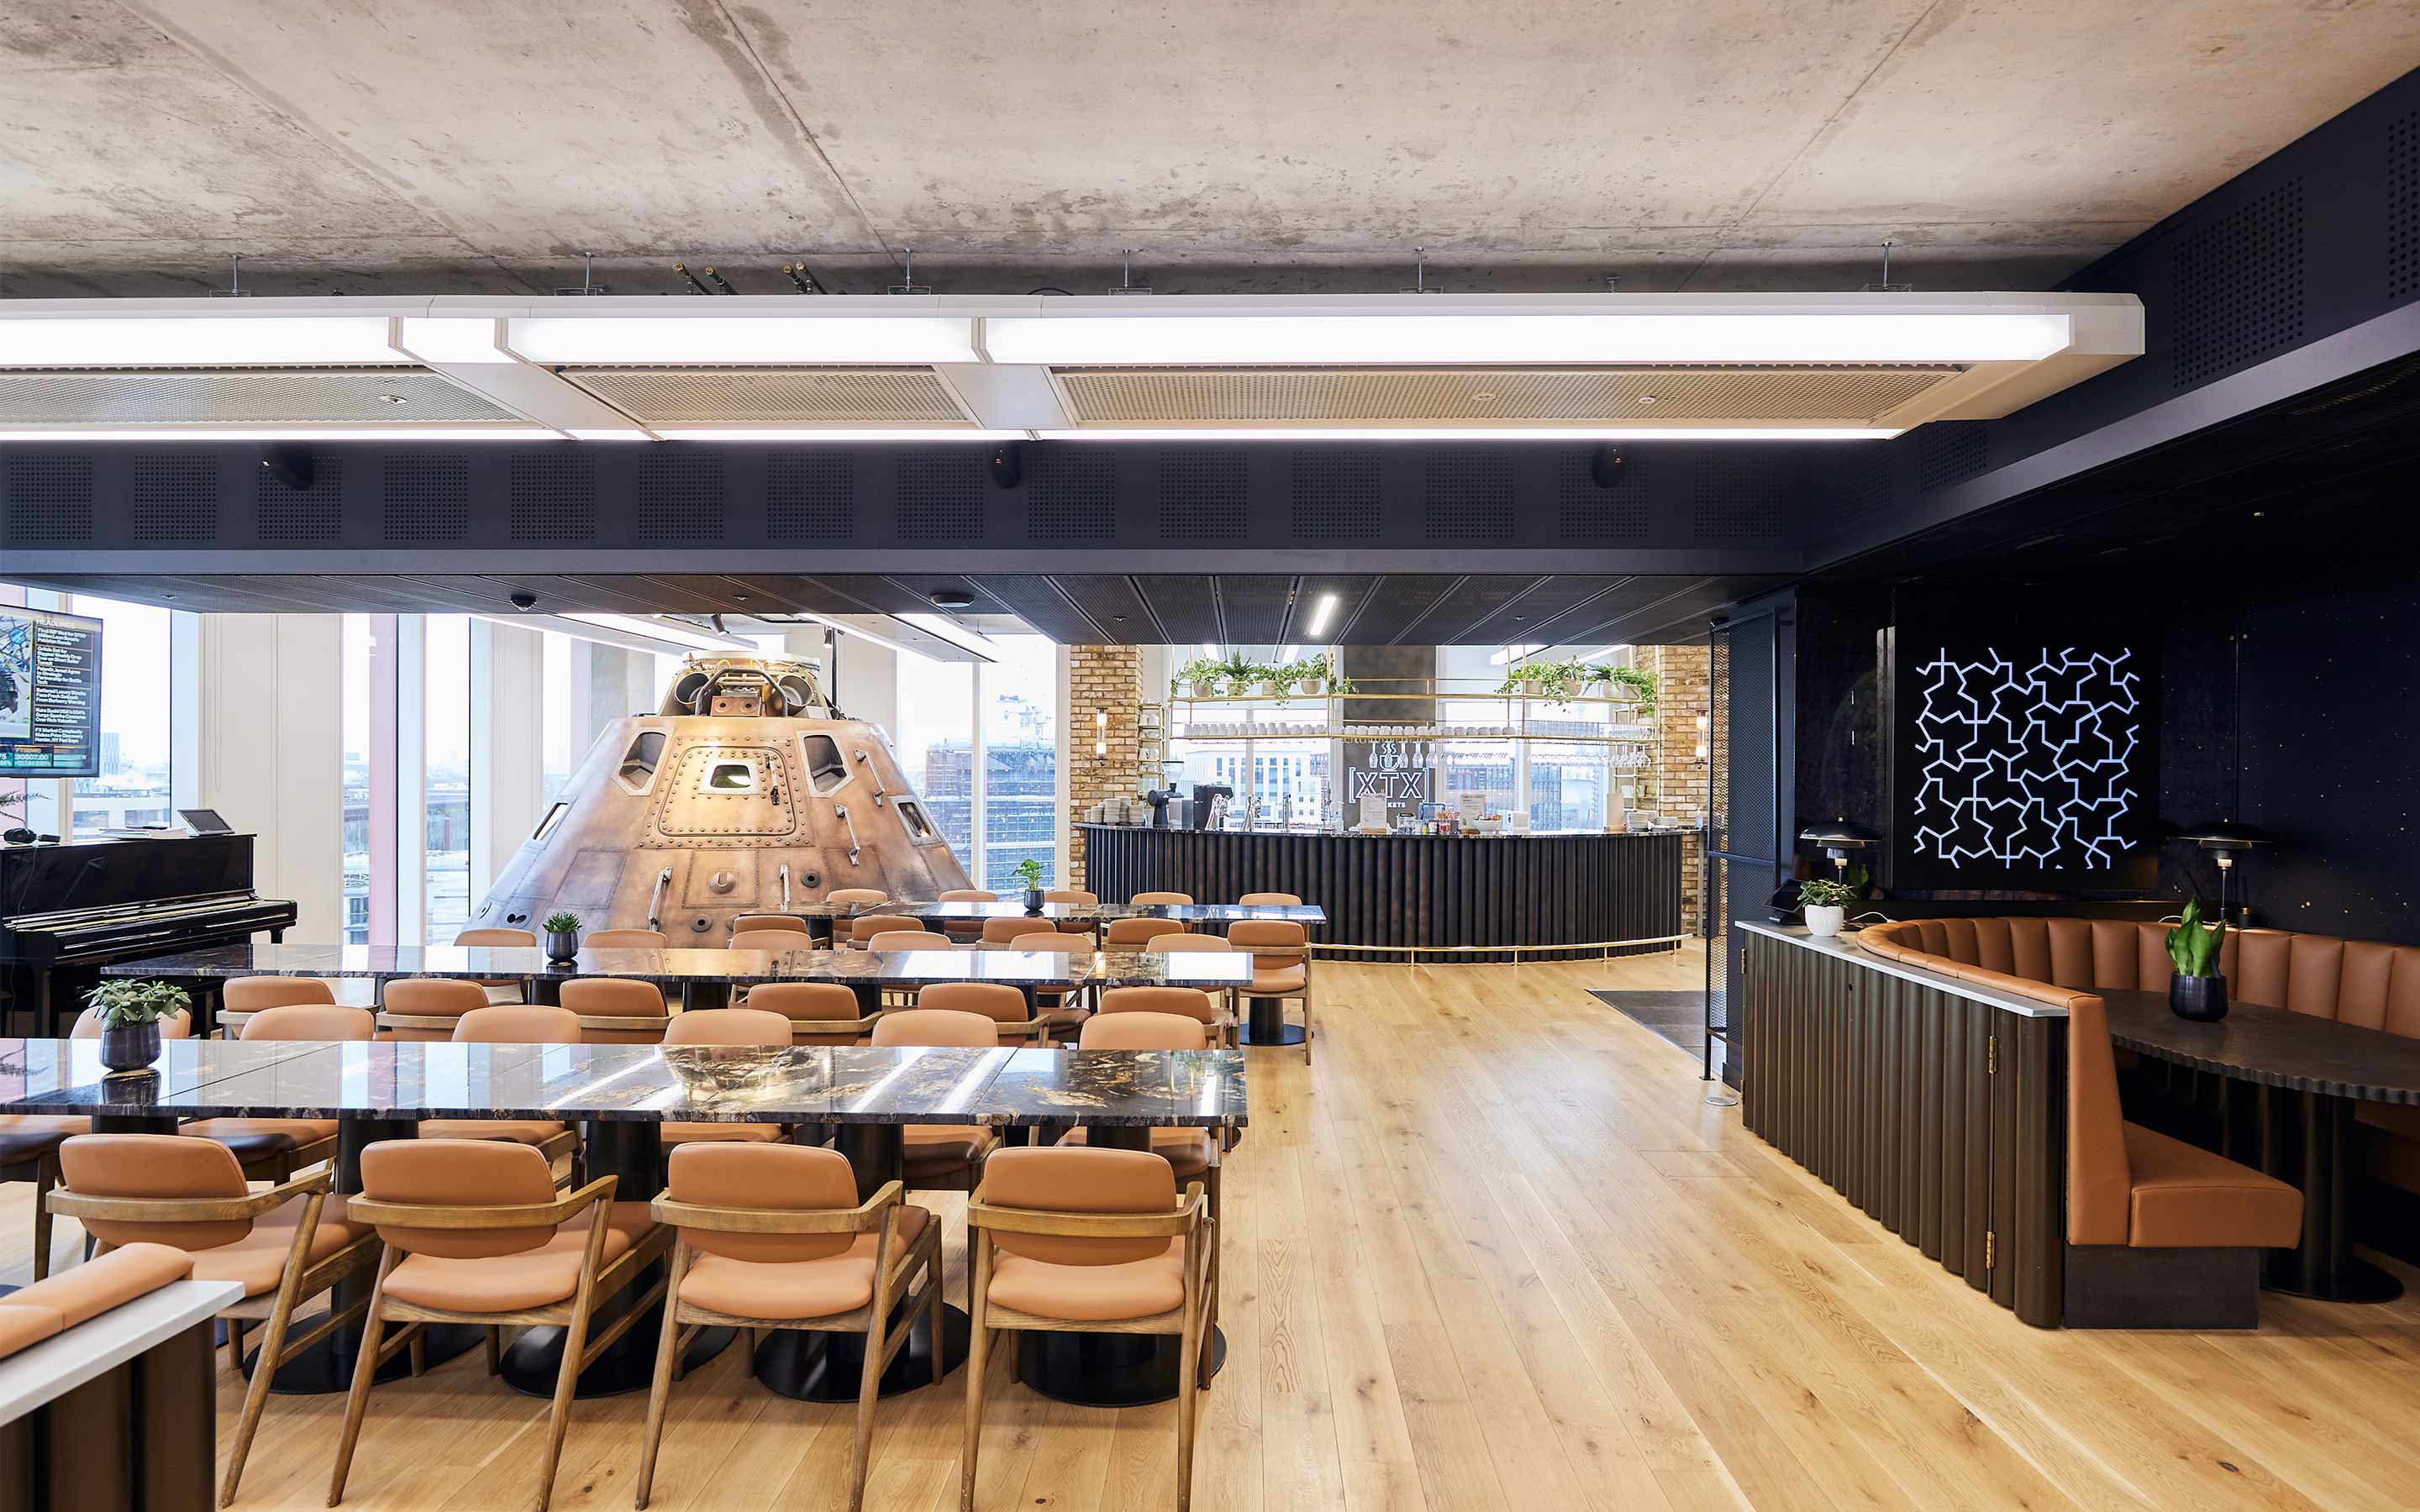 Office canteen with modern design, showcasing wooden floors, a barista bar, and leather chairs